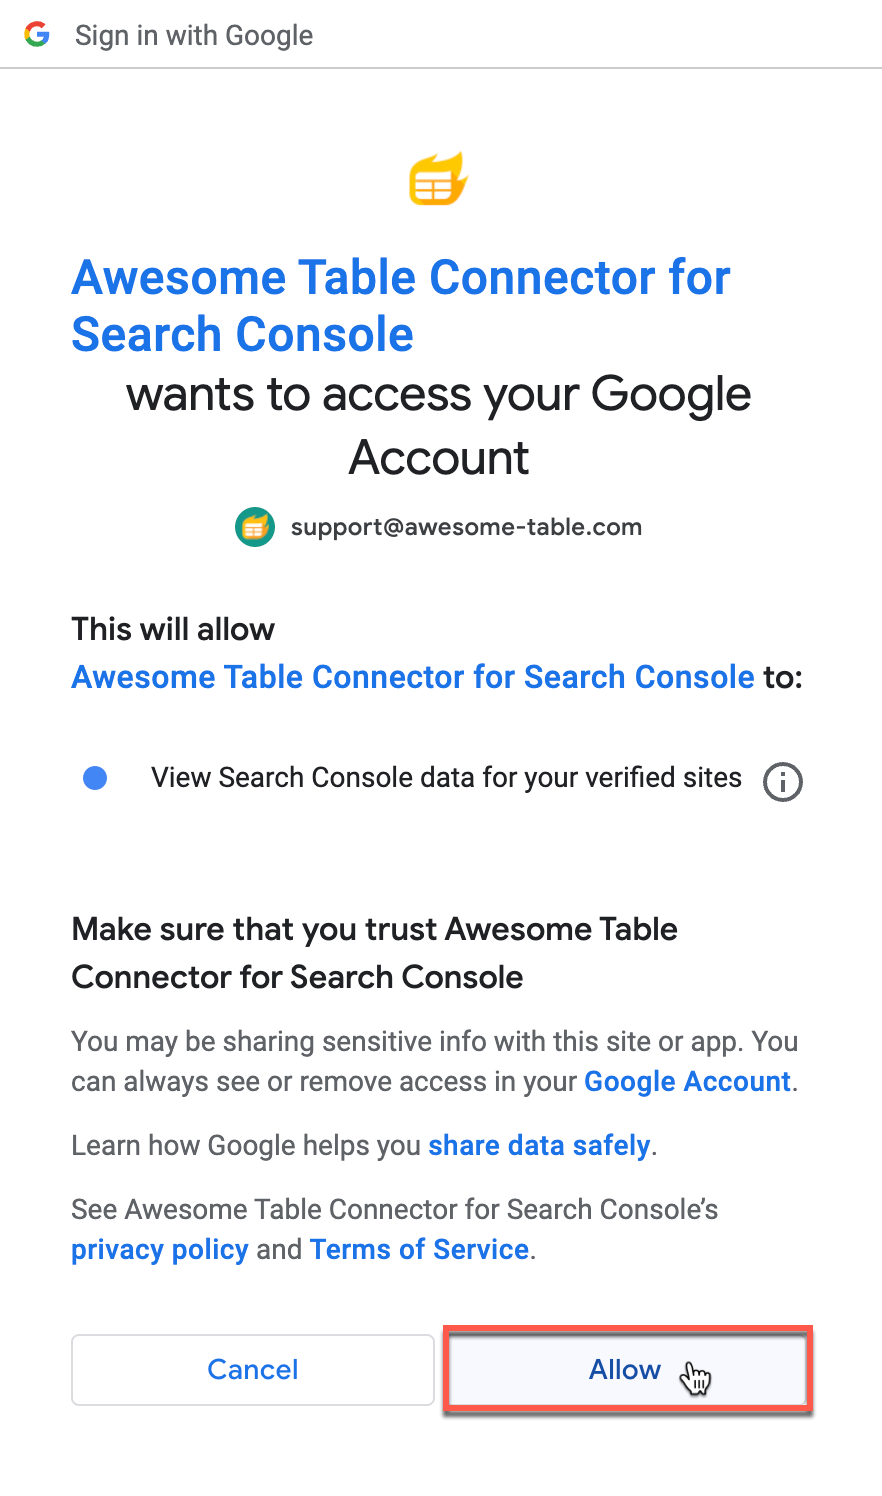 It allows Awesome Table Connectors to view your search console data for your verified sites